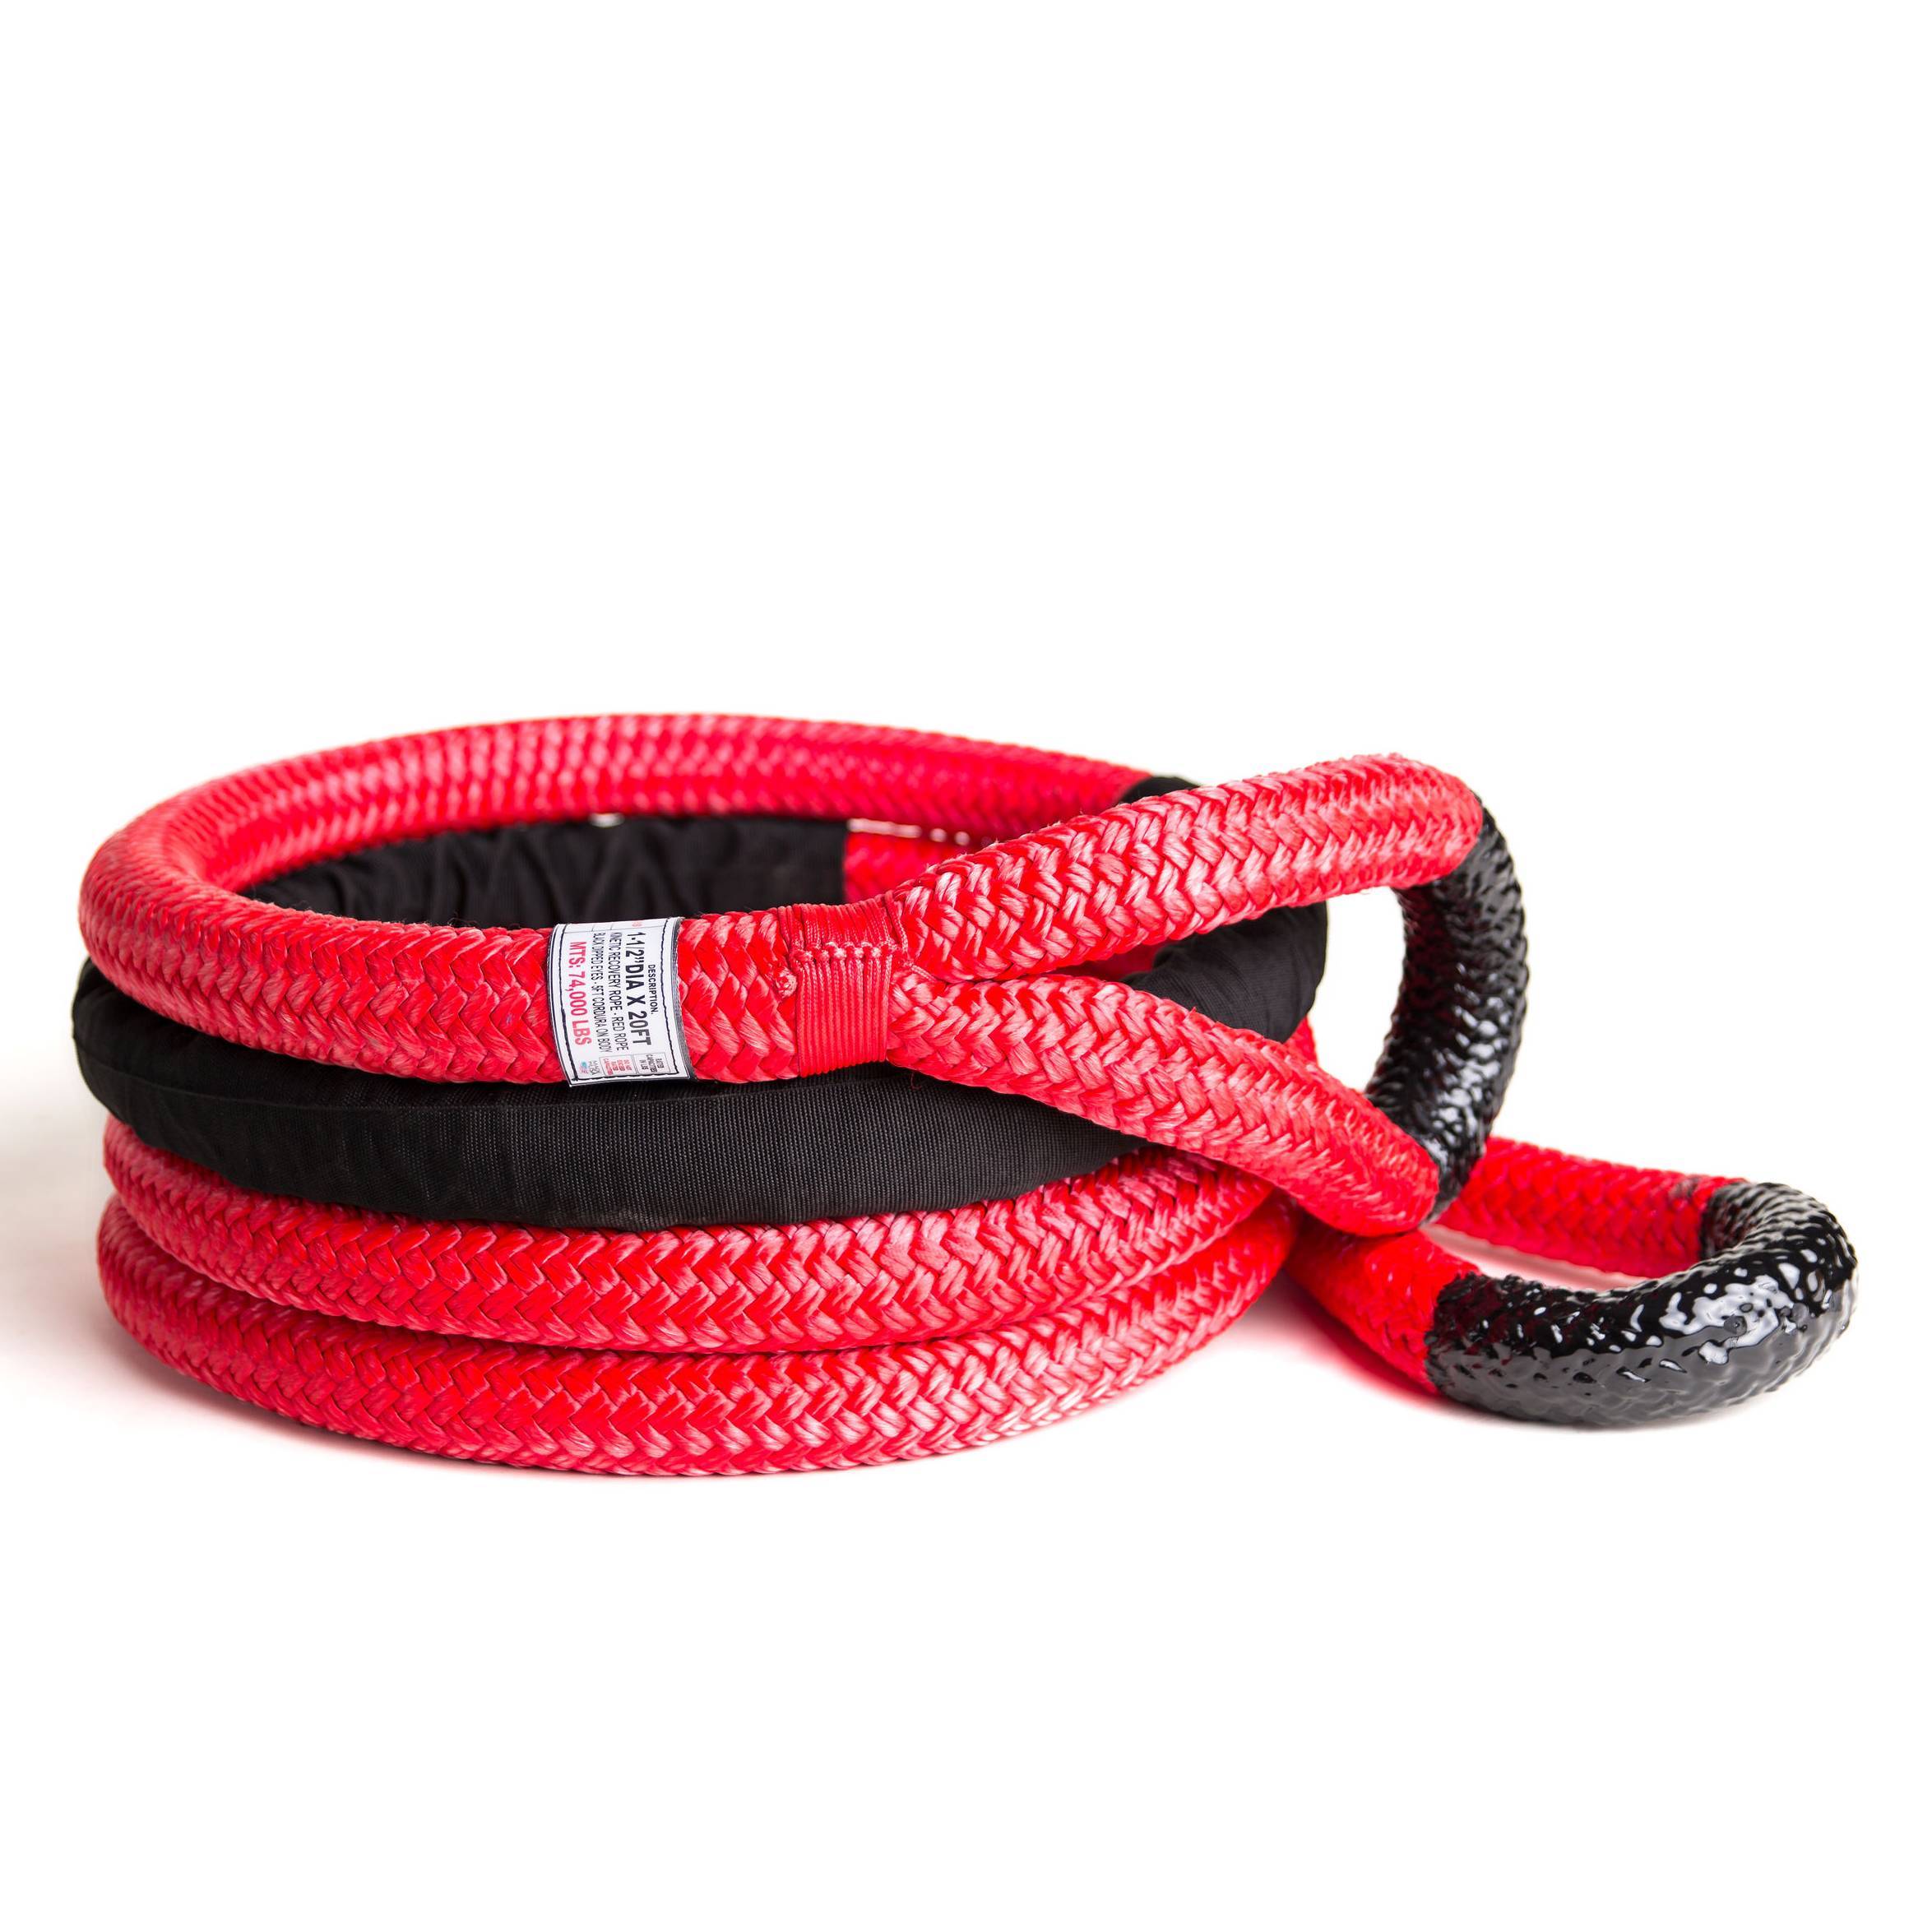 1 1/2" Yankum kinetic recovery rope, the "Cobra", for vehicles up to 27,000 lbs